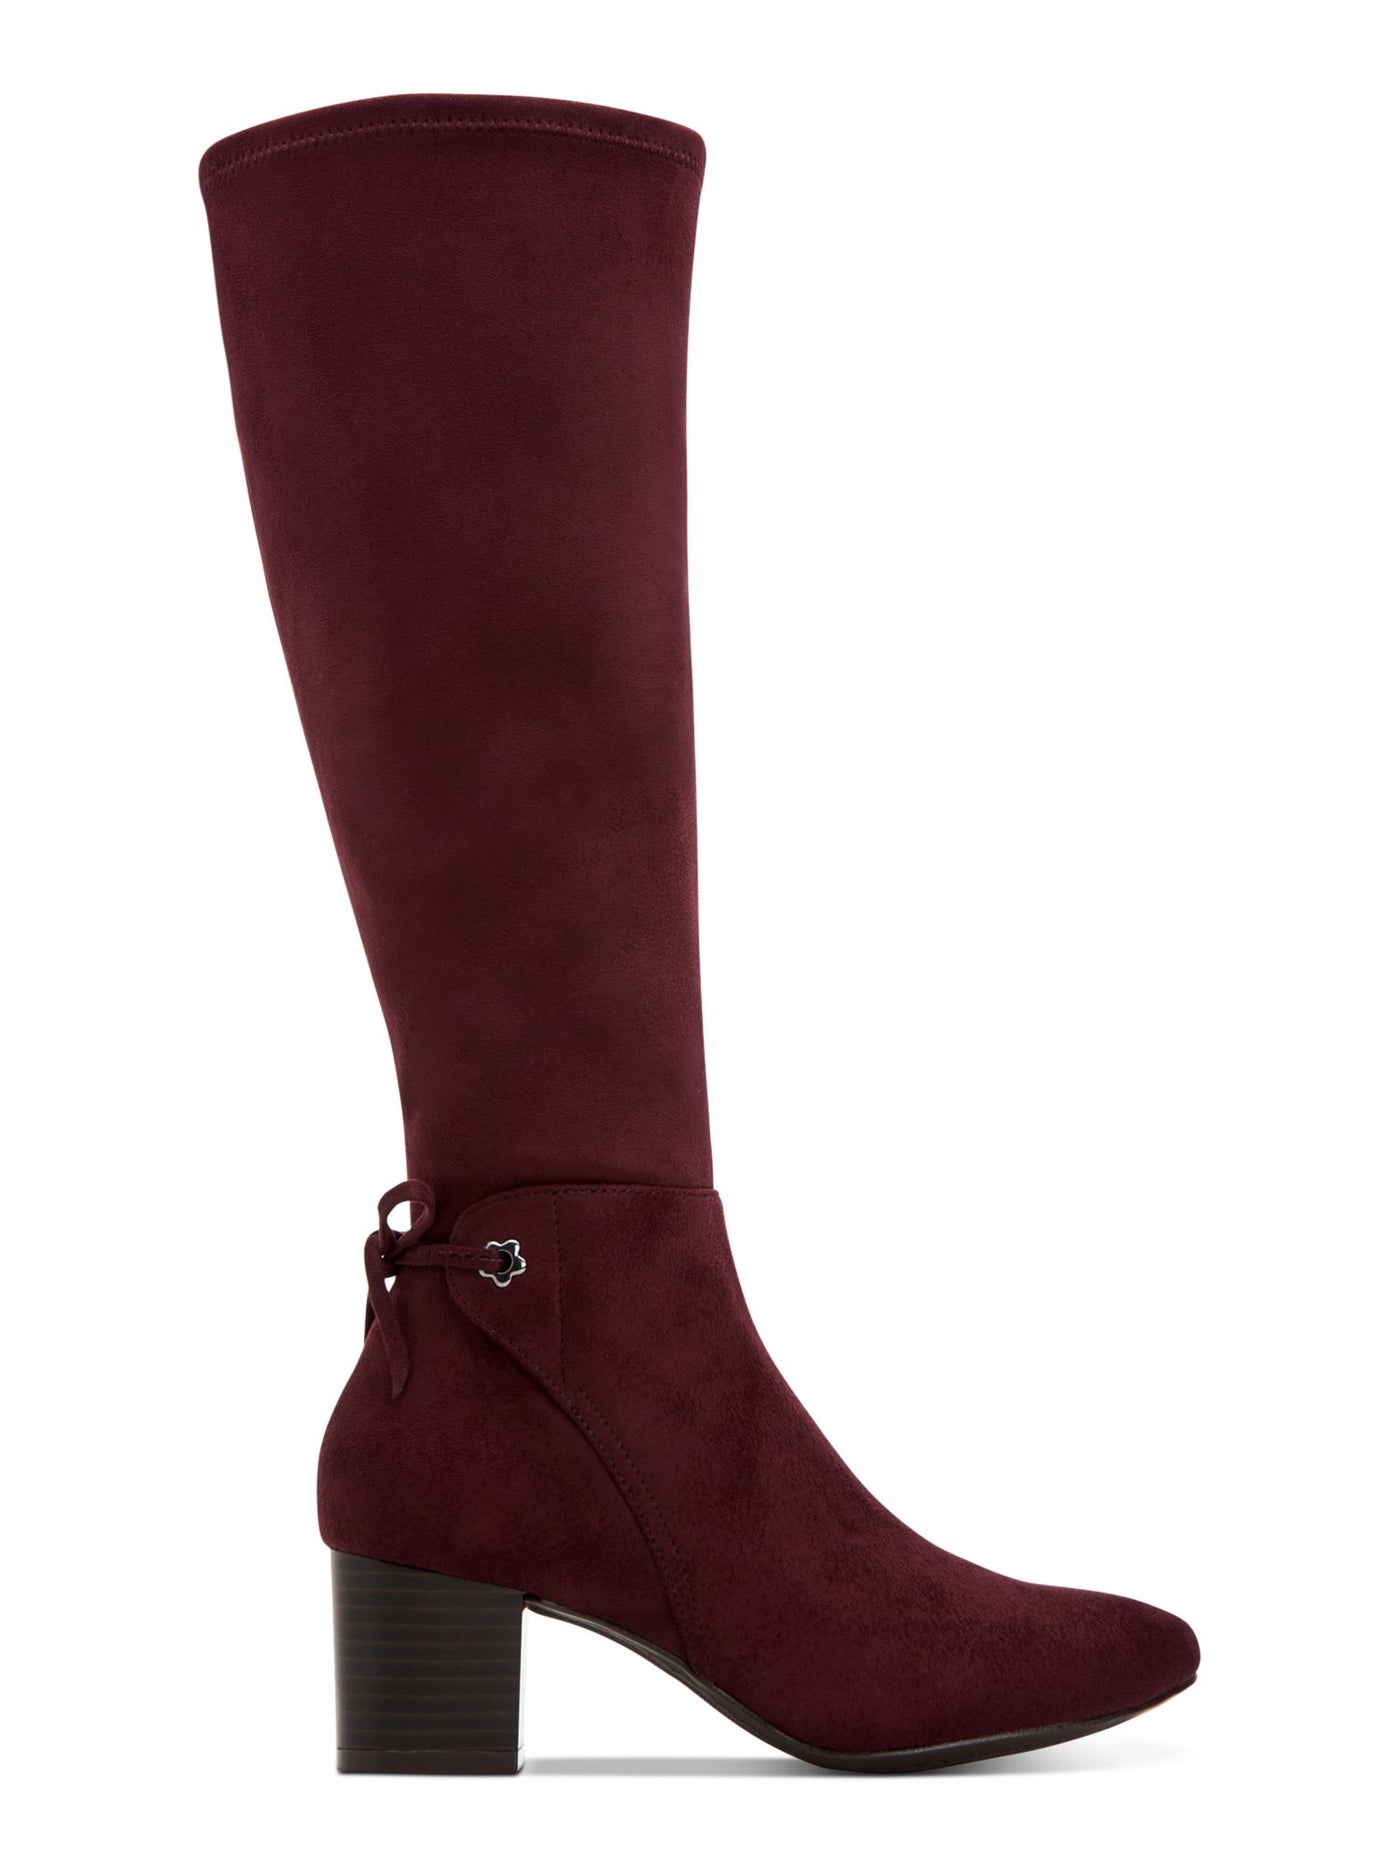 CHARTER CLUB Womens Chocolate Burgundy Flower Grommets Wide Calf Padded Jaccque Almond Toe Block Heel Zip-Up Boots Shoes 8.5 M WC